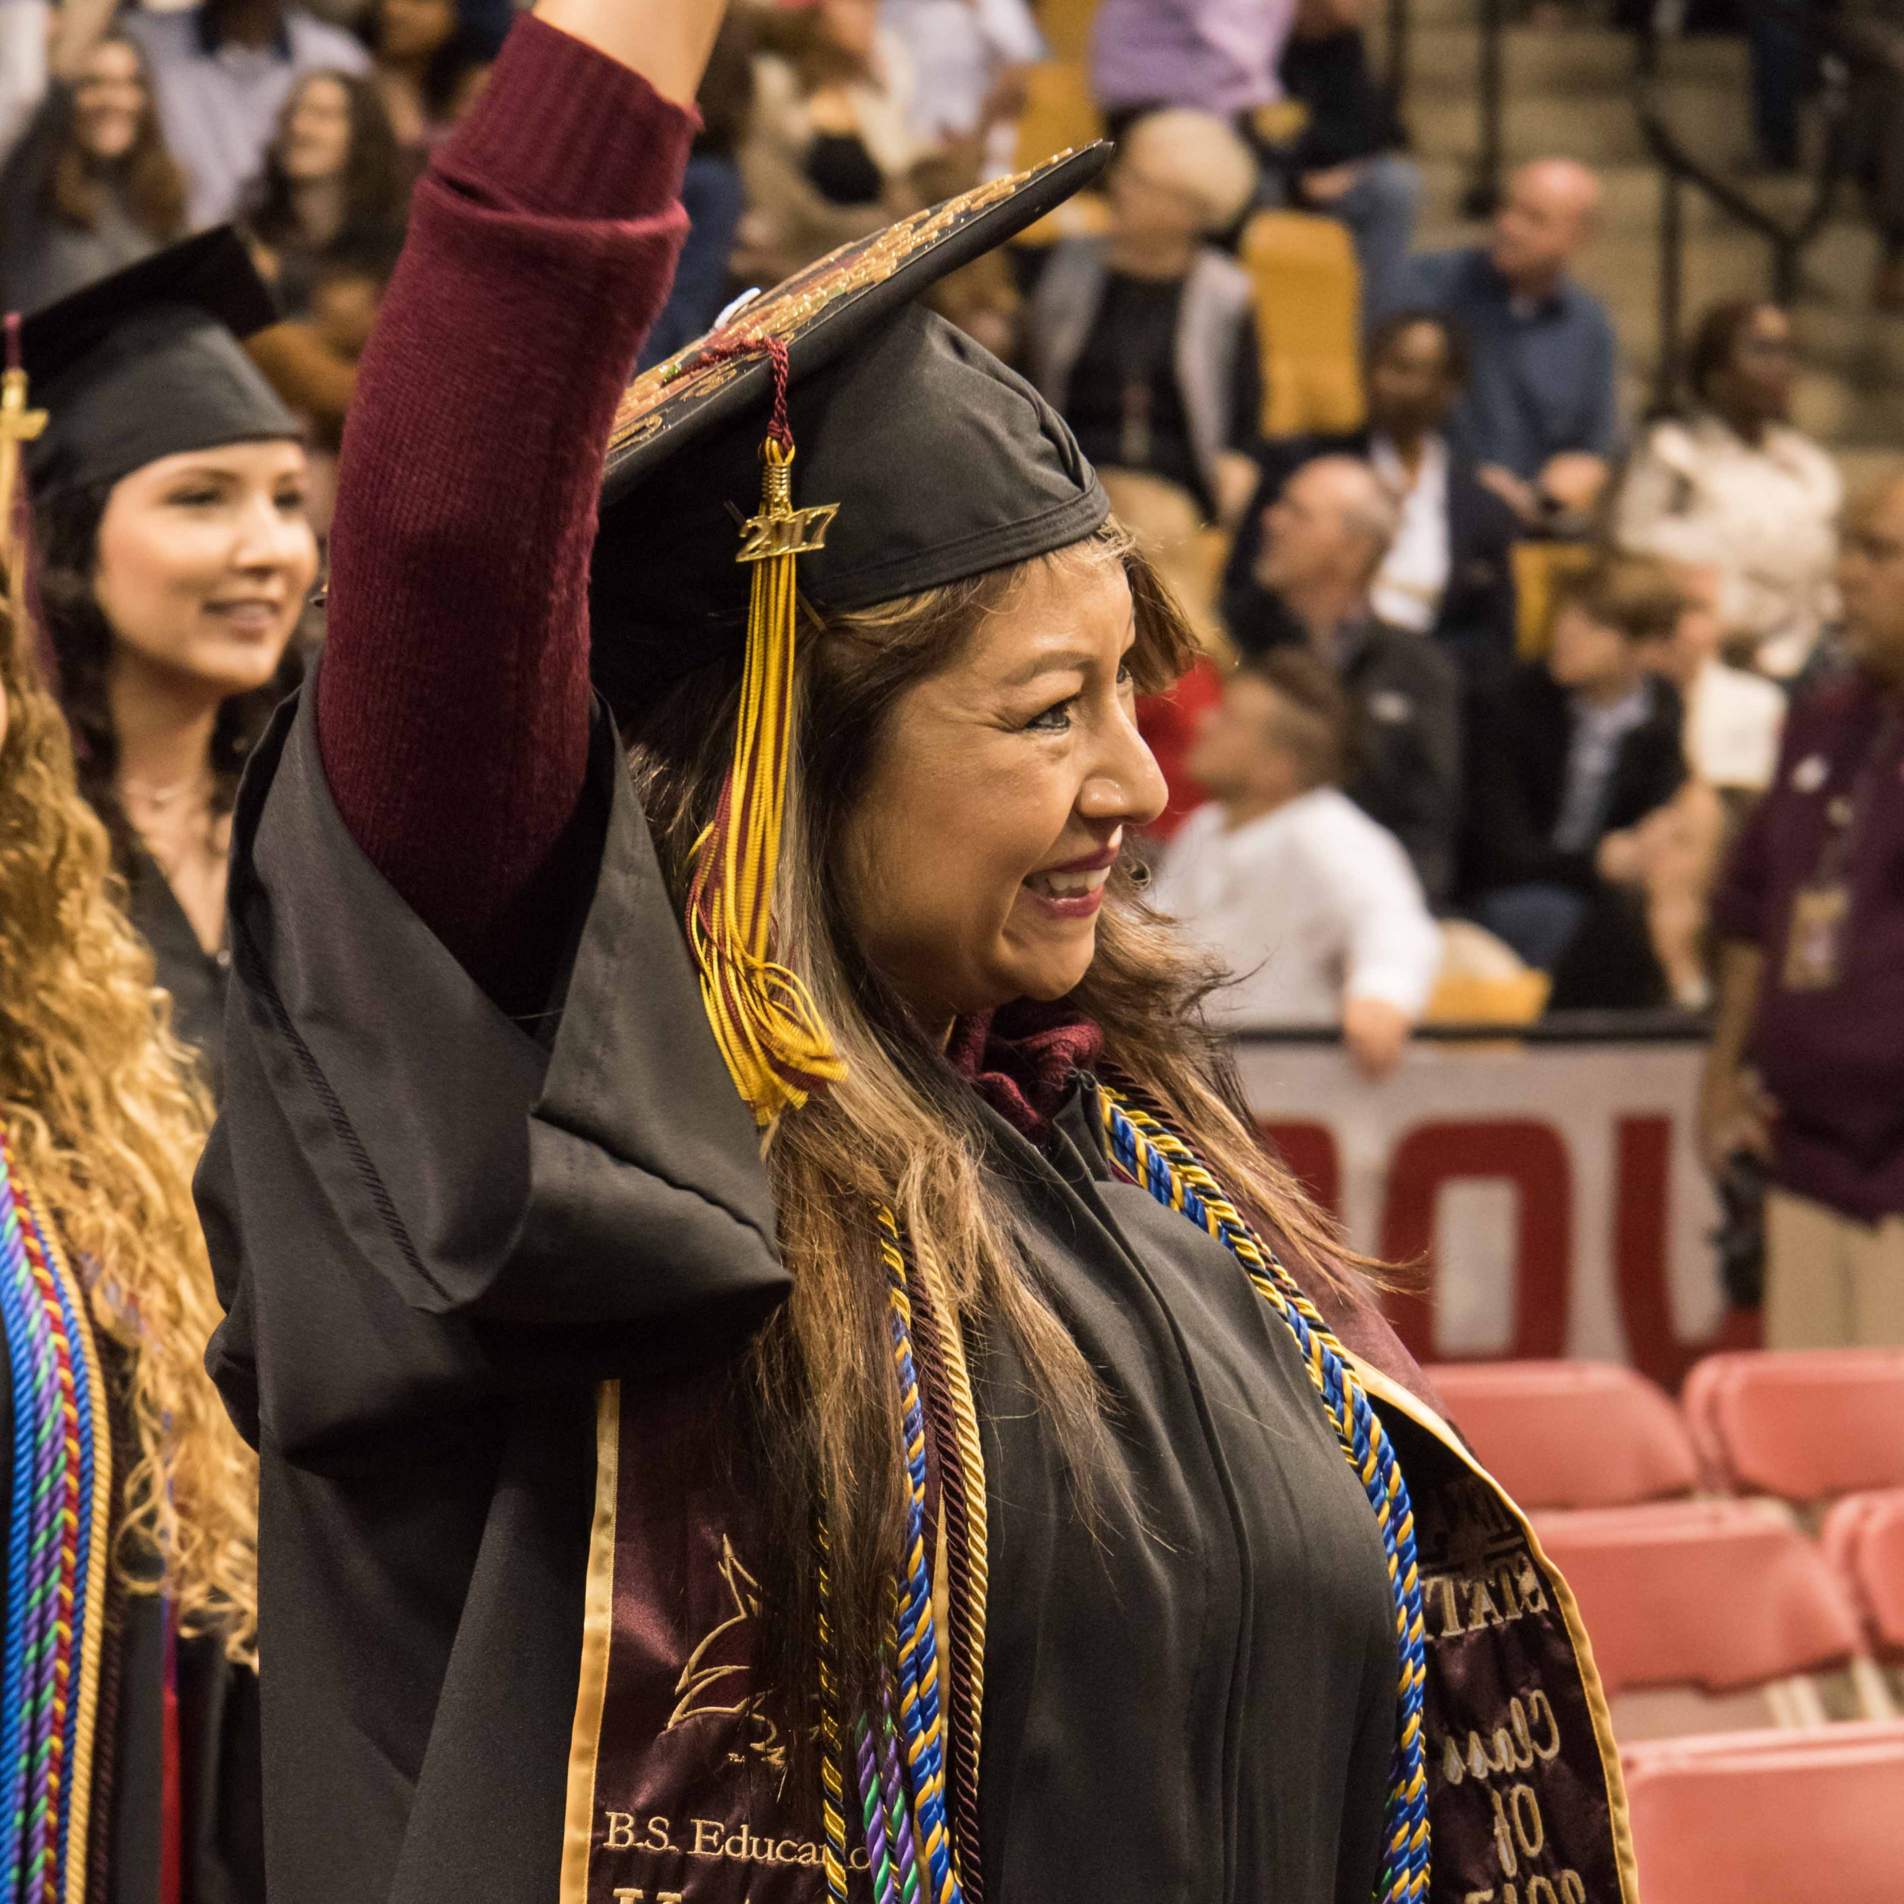 Graduate waving during the processional.